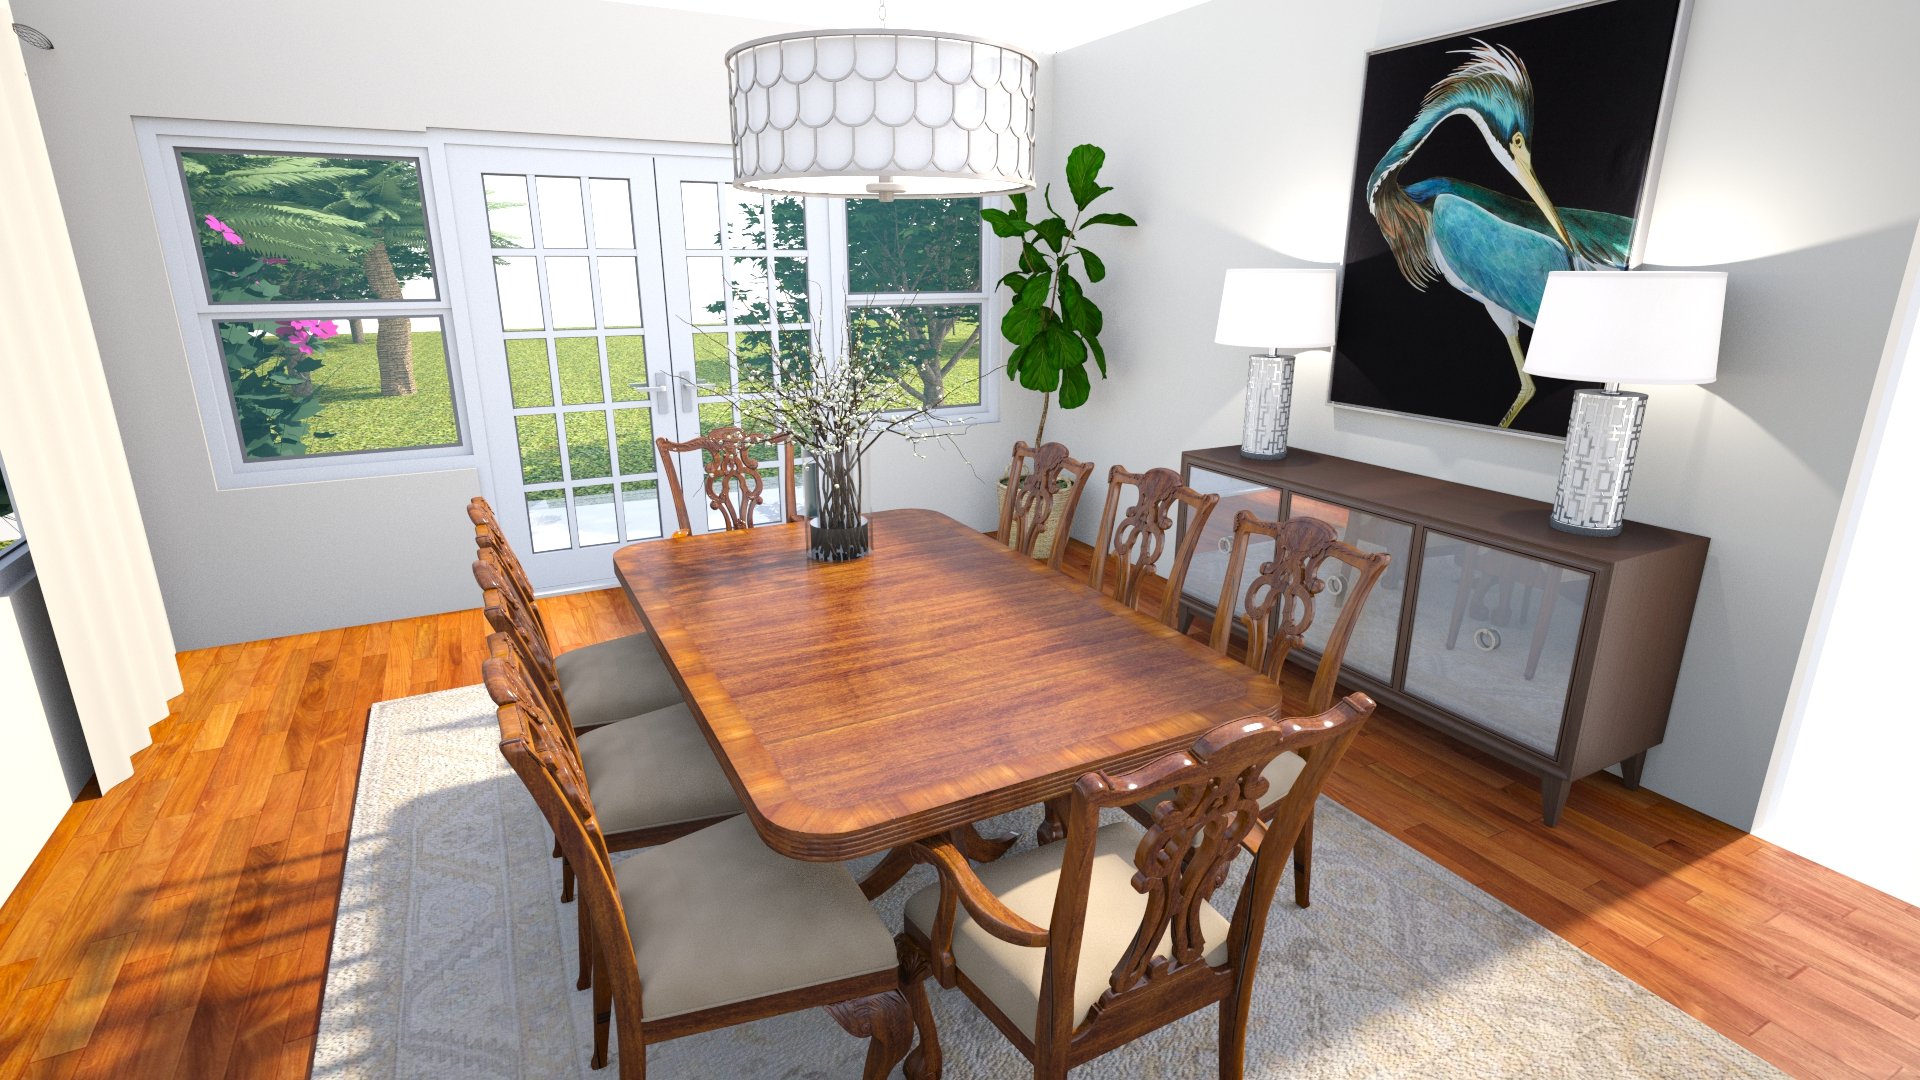 Decorating a large dining room wall? | Design Tips